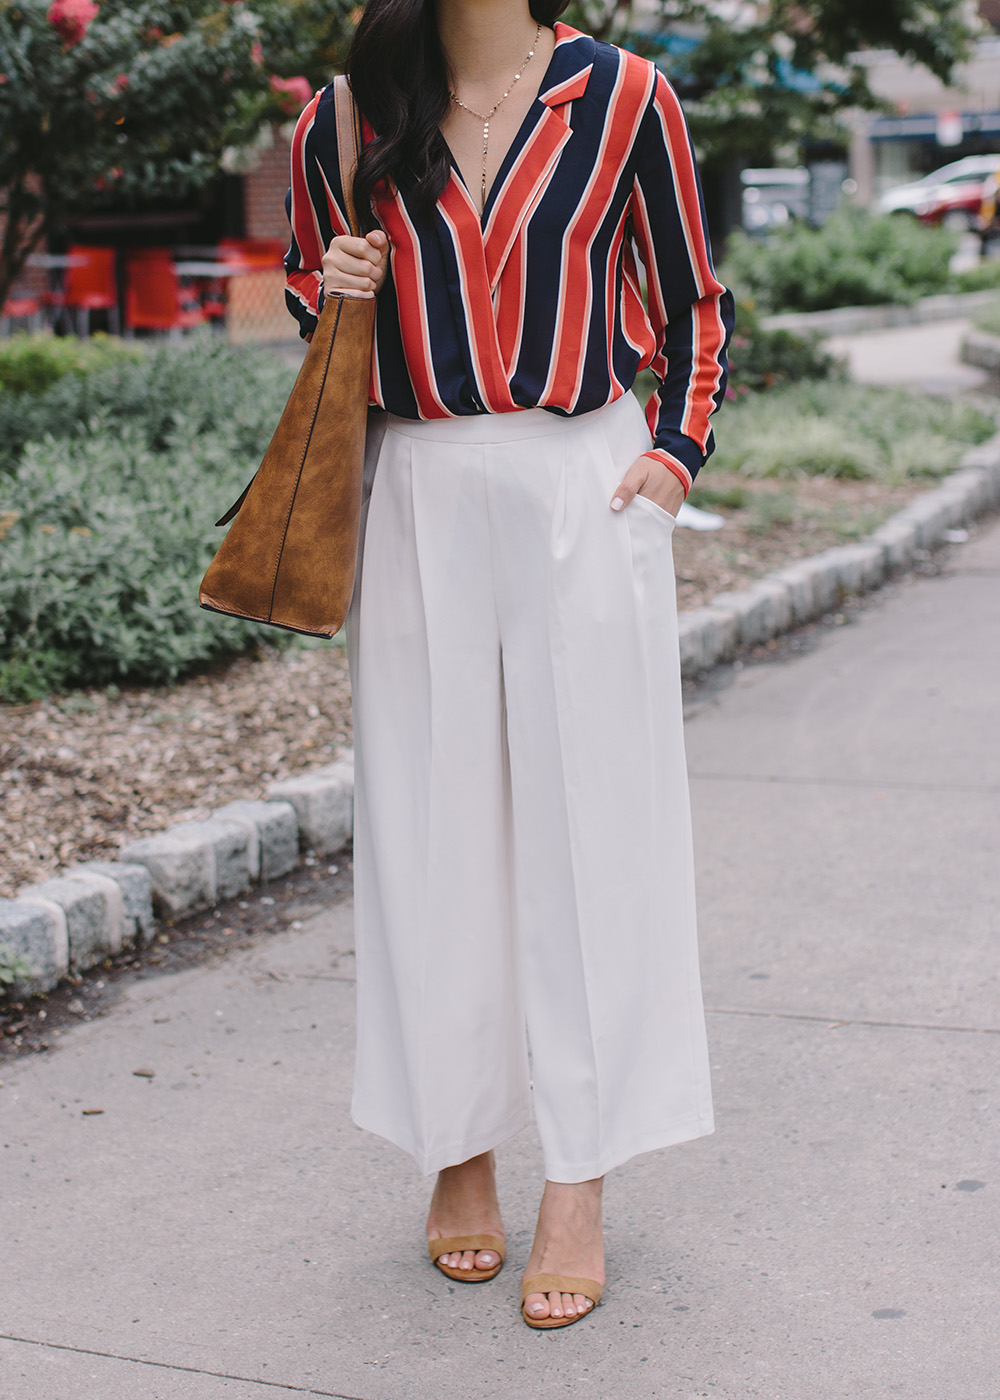 Office Style / Striped Blouse & White Culotte Pants